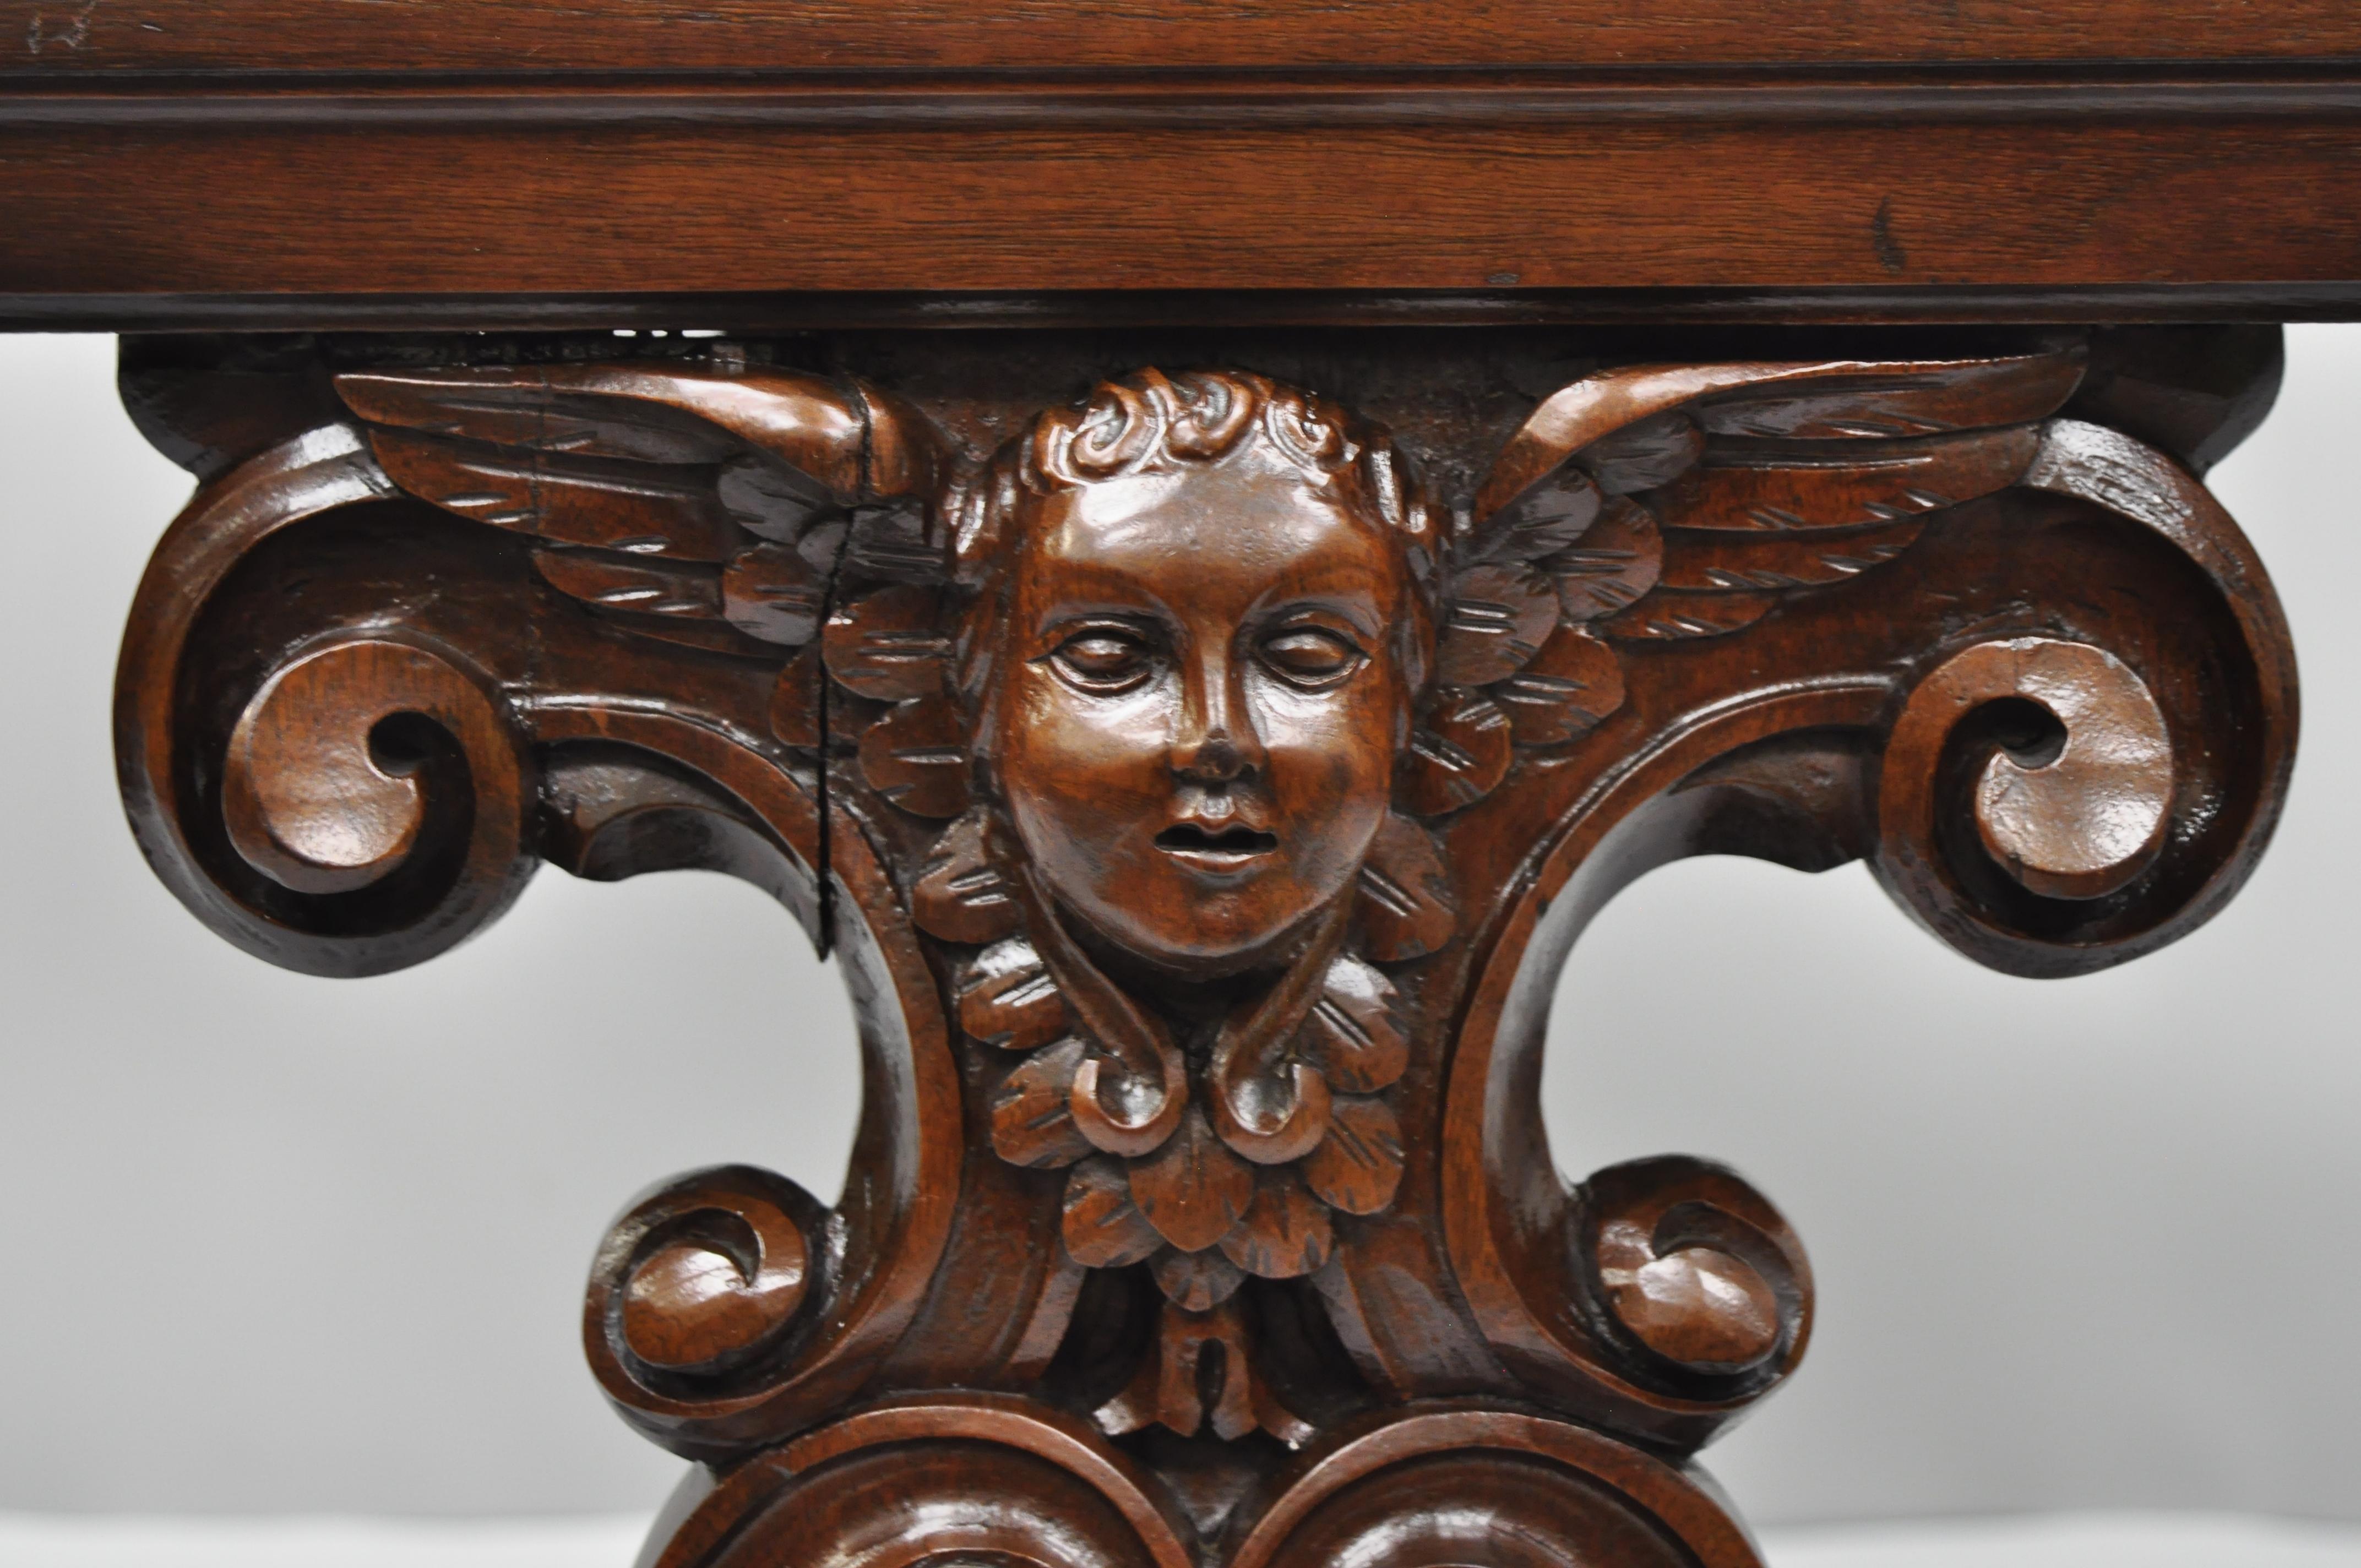 Antique French Renaissance carved cherub angel walnut and marble accent table. Item features ornately carved winged angel faces to sides, inset marble top, and solid wood construction; great style and form, early 20th century. Measurements: 20